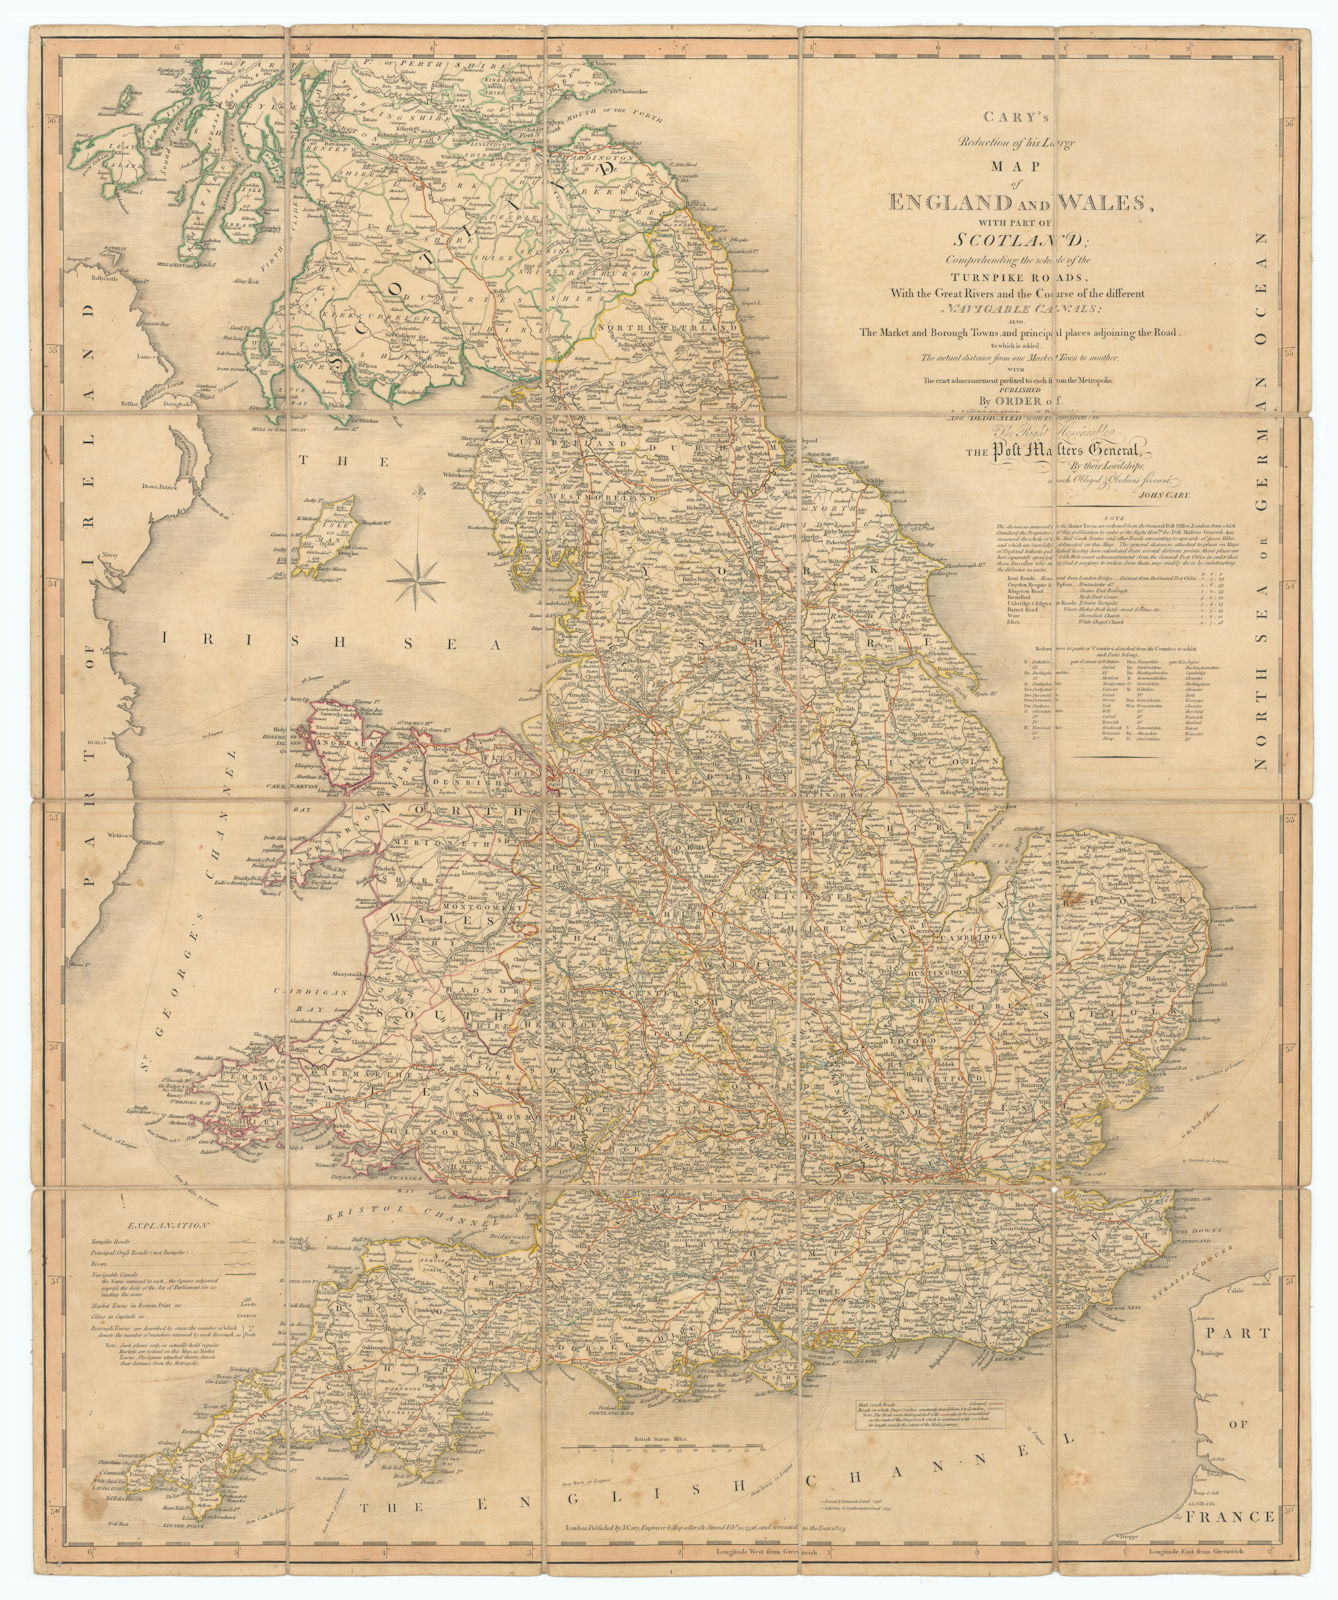 'Cary's reduction of his large map of England & Wales'. Turnpikes canals &c 1805